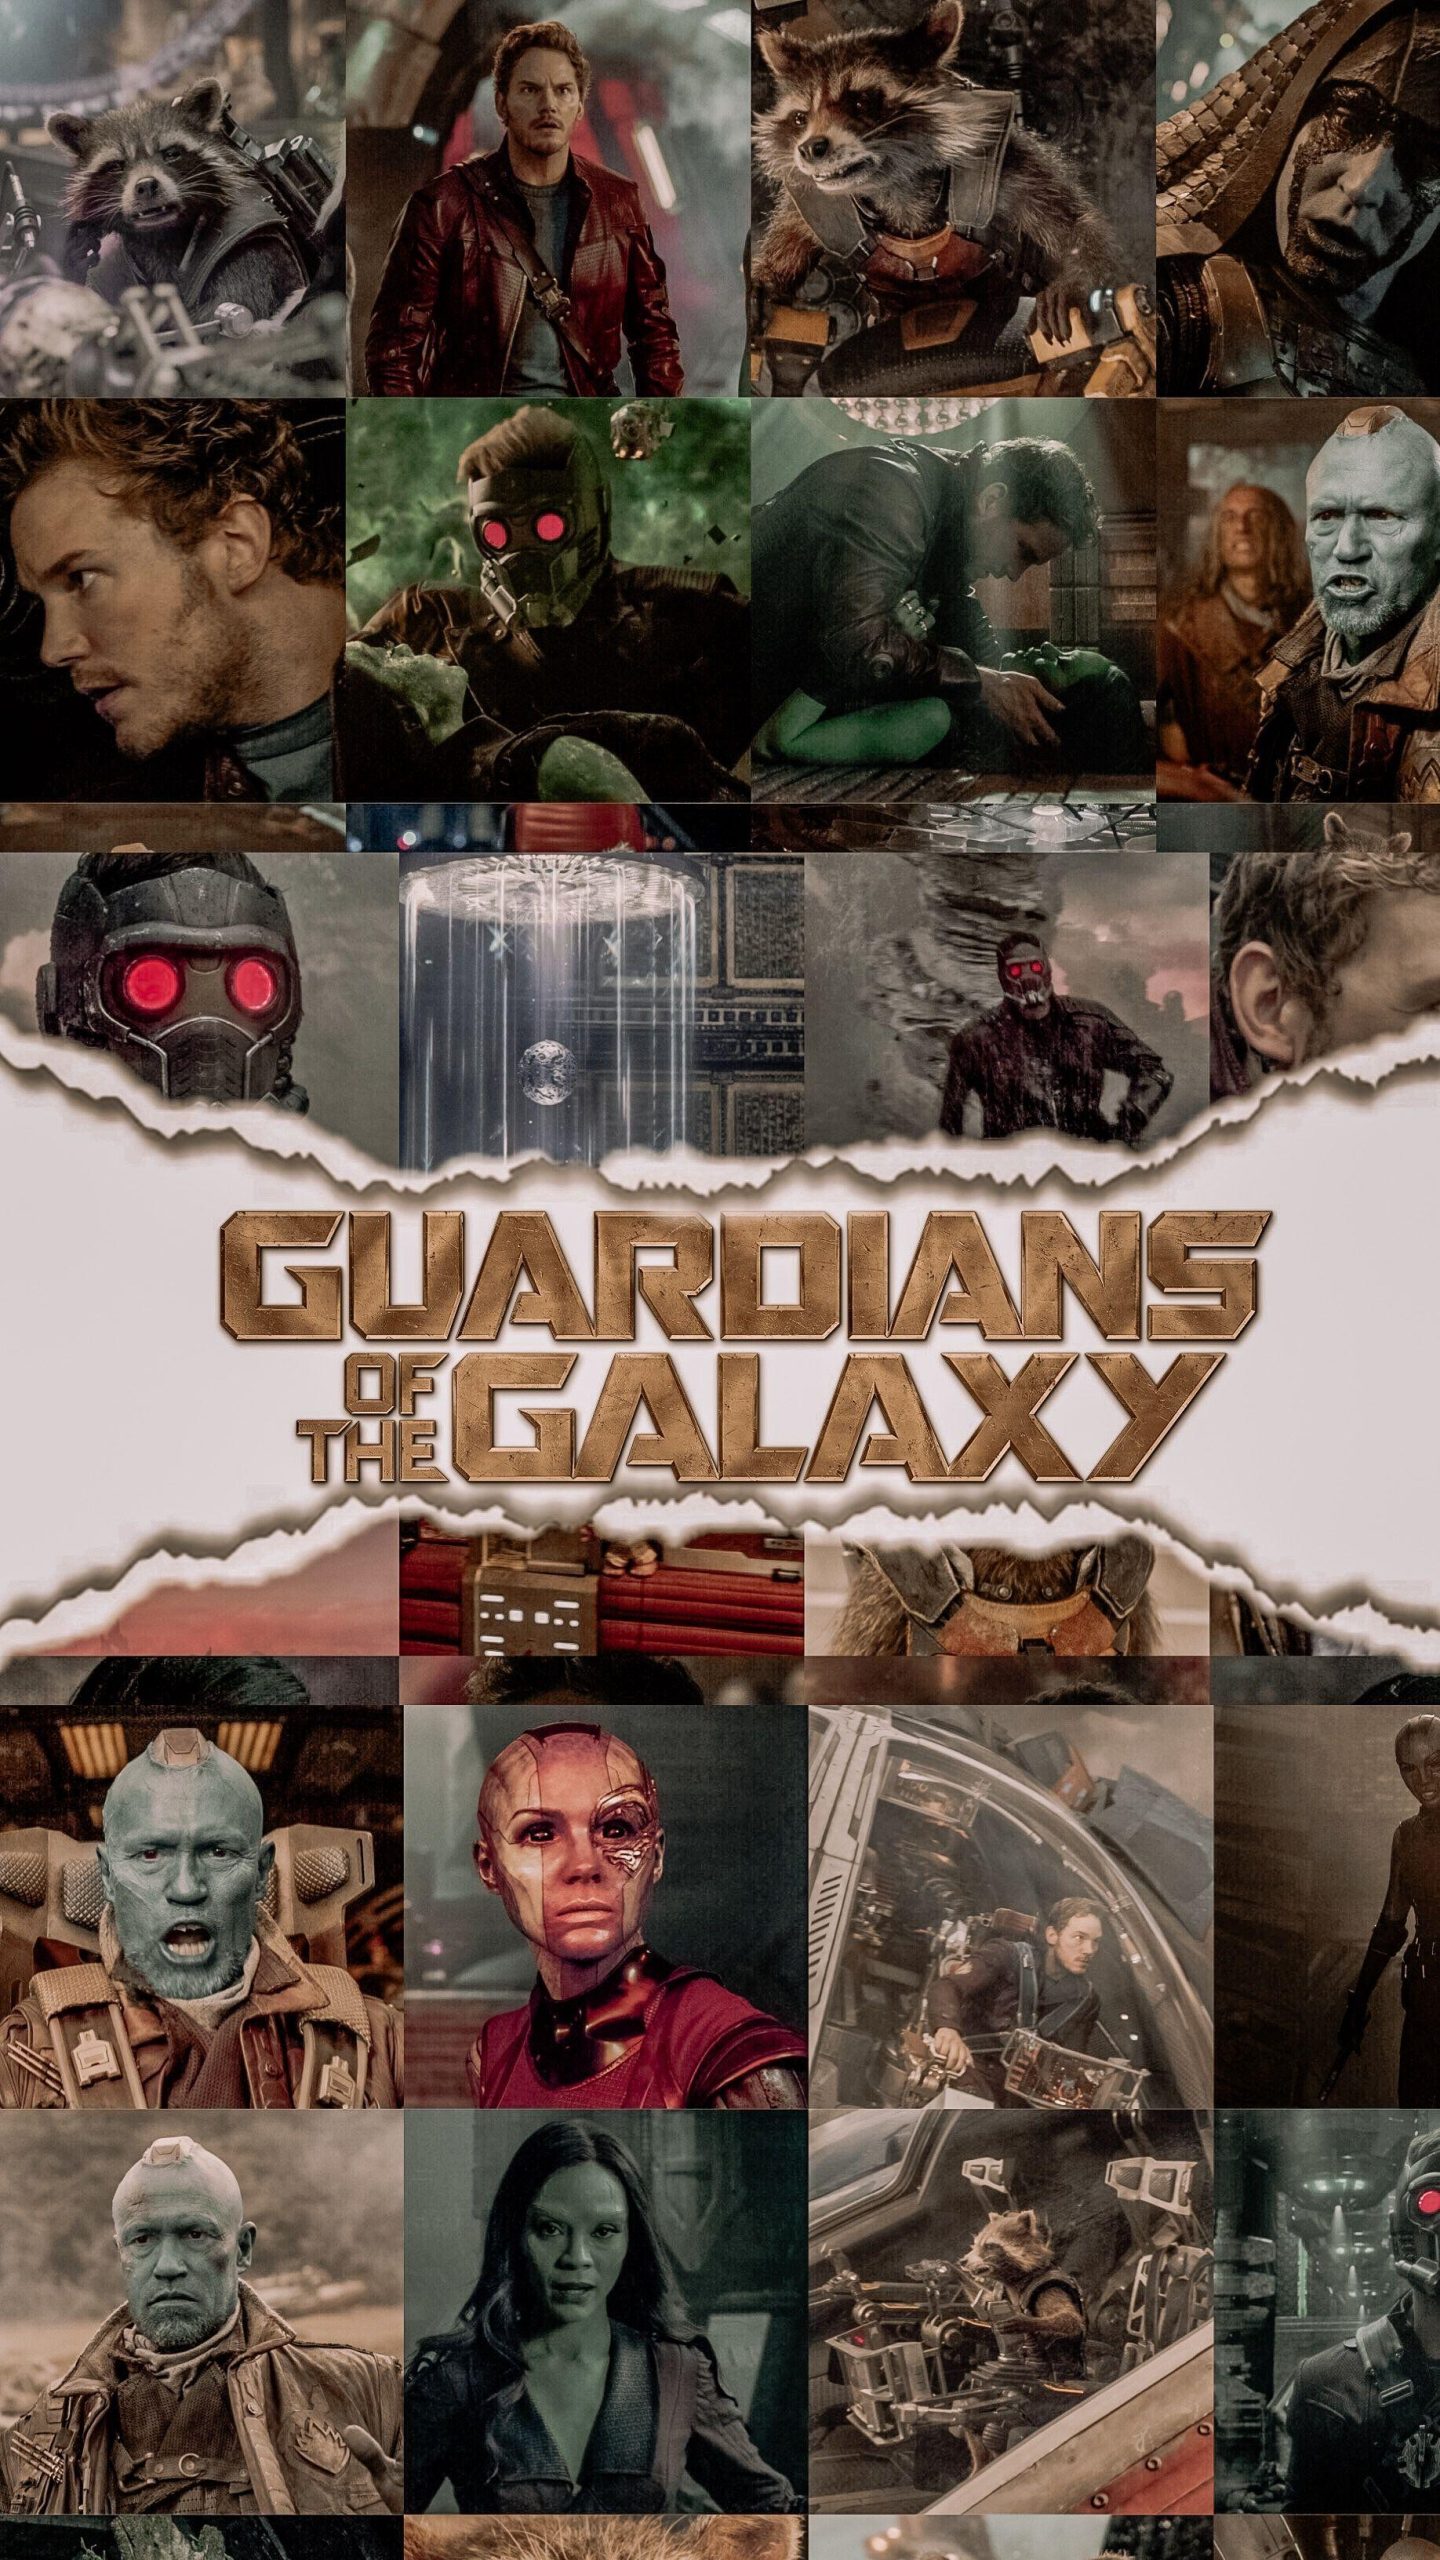 Marvels Guardians Of The Galaxy 2021 Wallpaper For Pc, Marvels Guardians Of The Galaxy 2021, Movies